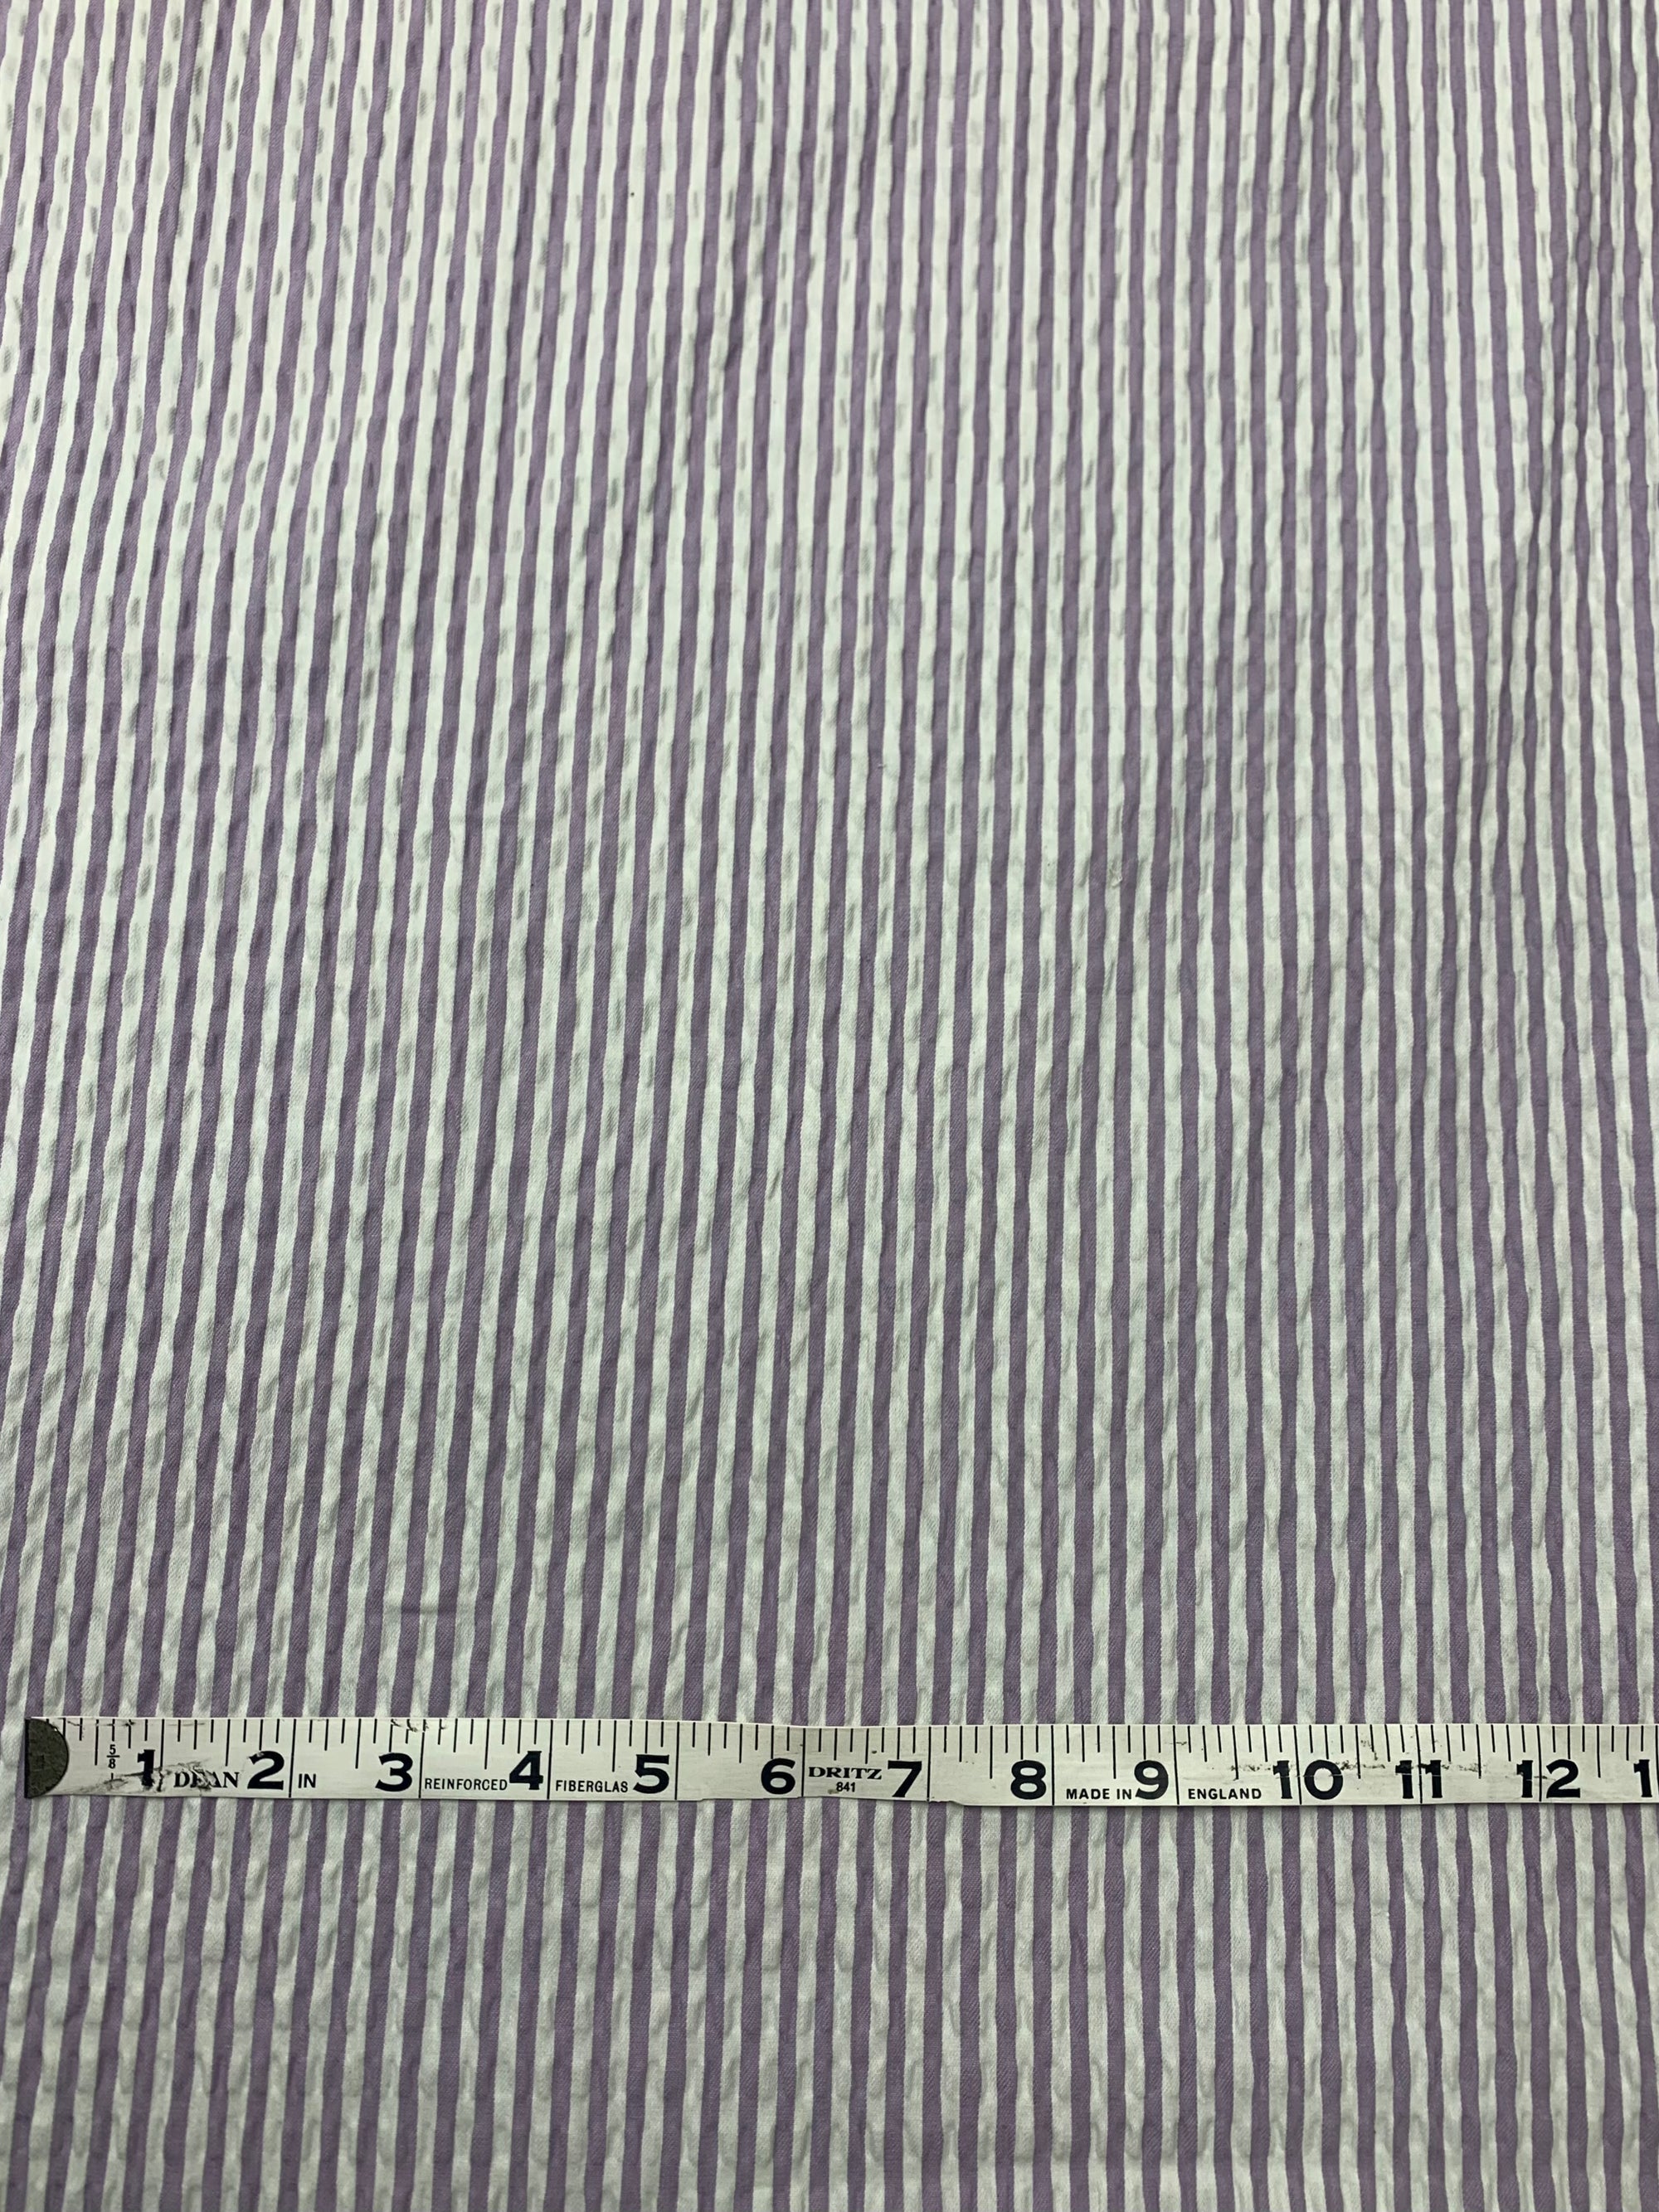 A cotton seersucker fabric in a striped Lilac and White vertically with a measuring tape on top of the fabric.